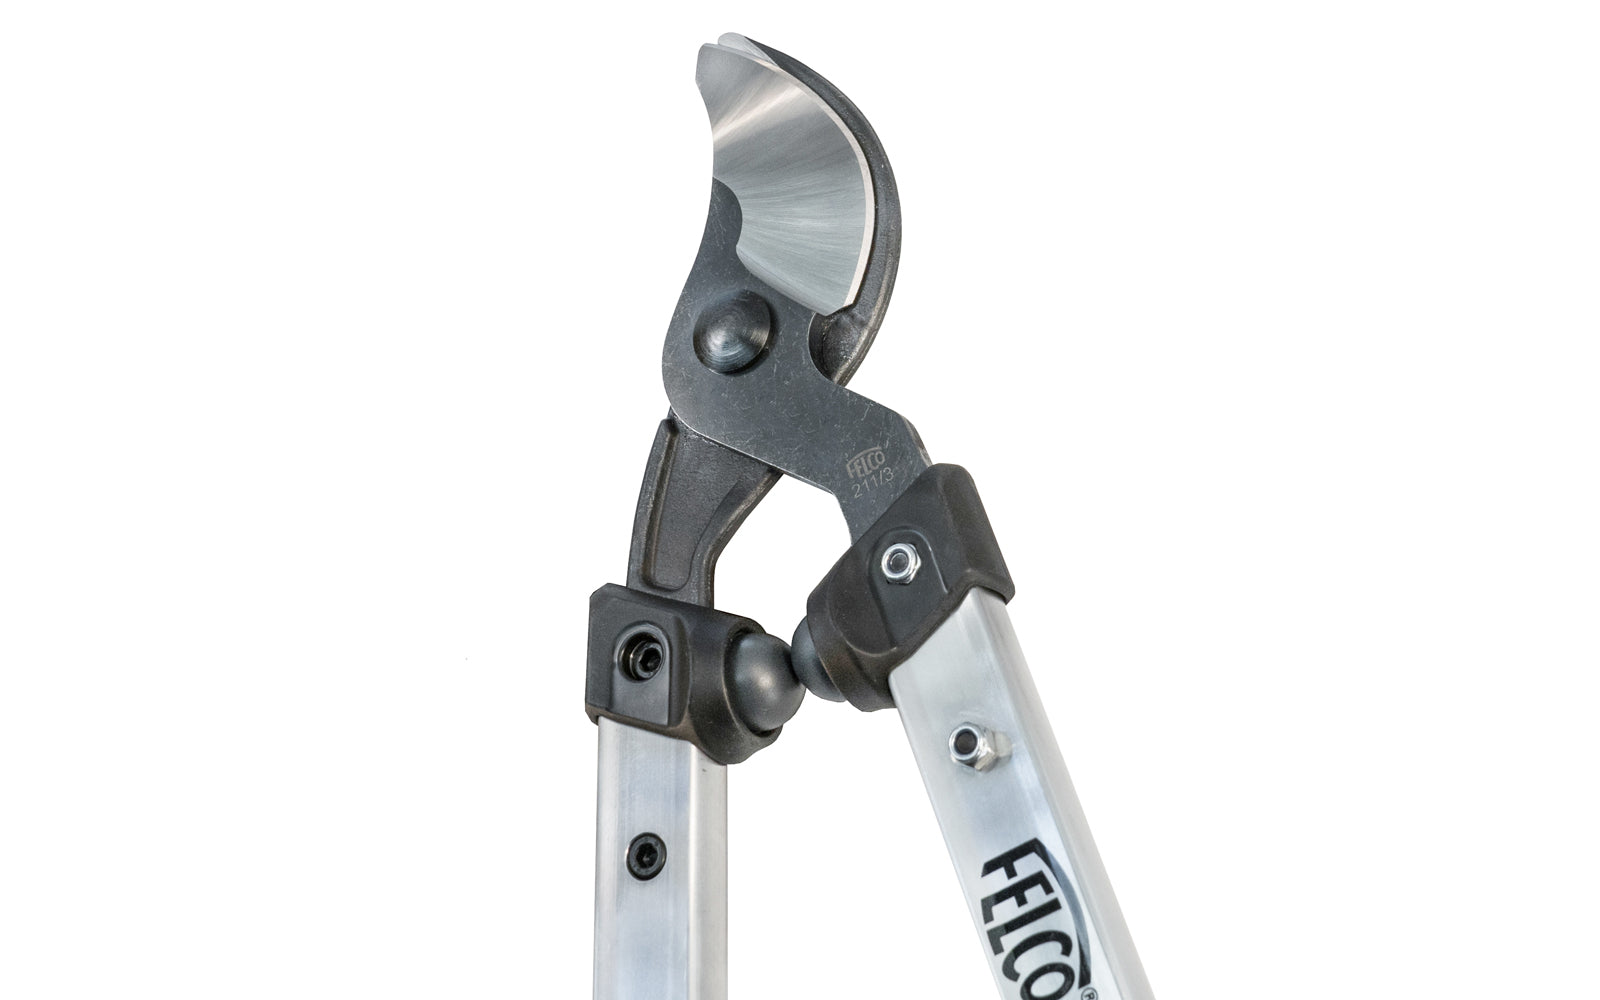 Felco Loppers - Model 211-60 ~ Made in Switzerland ~ High quality Swiss-made 24" loppers made by Felco in Switzerland. The blade & anvil blade are constructed of hardened steel. Ultra-lightweight aluminum handles. 1.38" (35 mm) cutting diameter capacity. Bypass pruning action - 24" long loppers - 783929102023